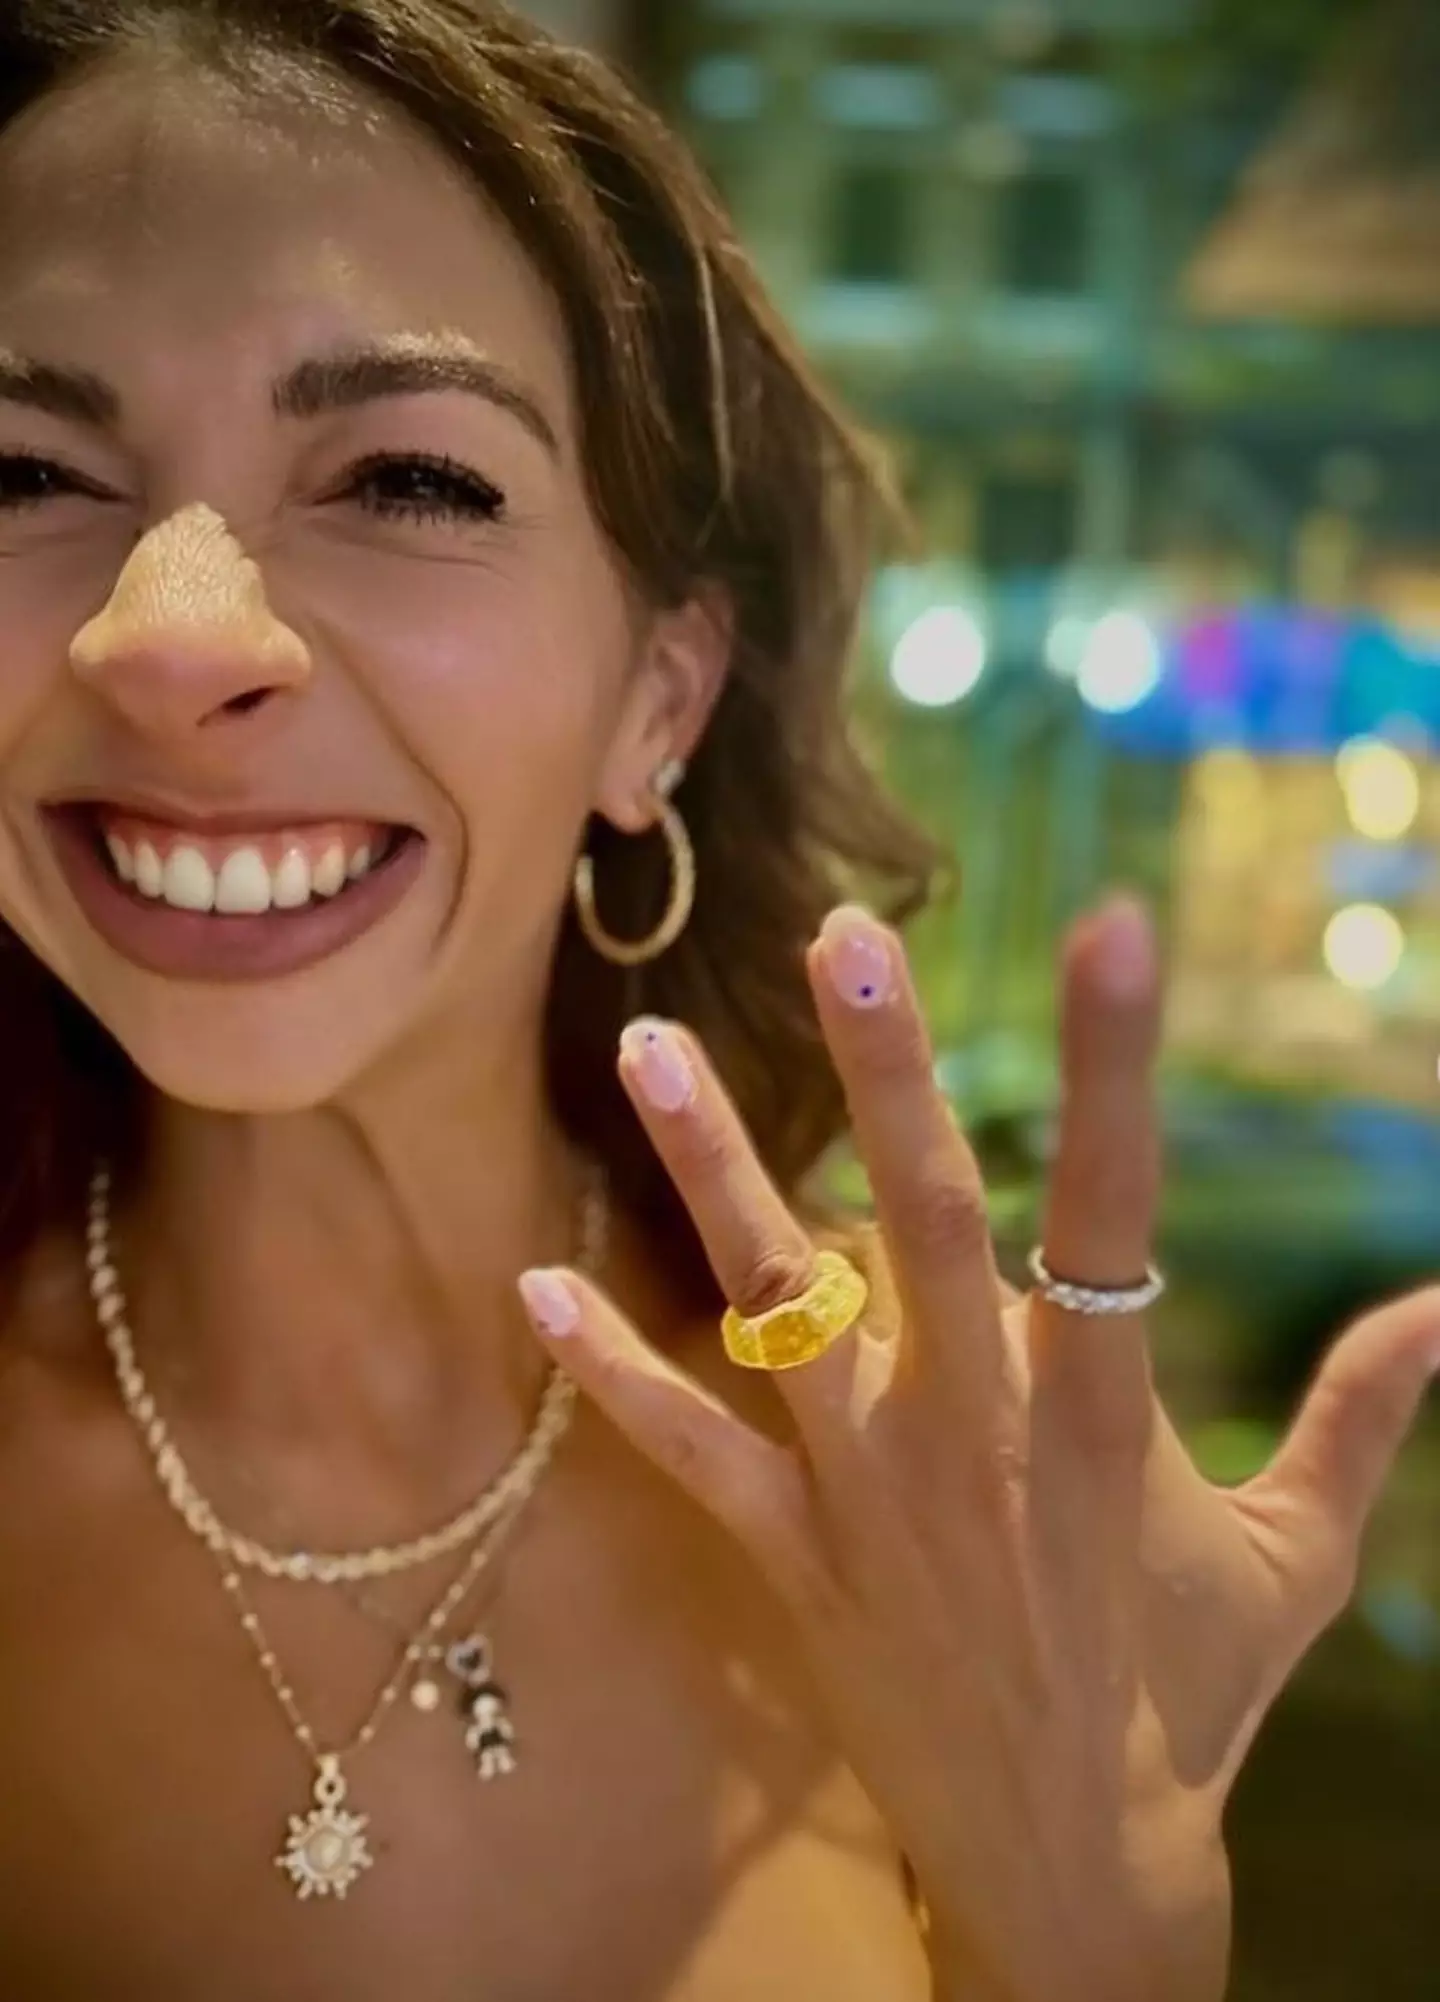 The bride-to-be showed off her 'hairdo' ring.